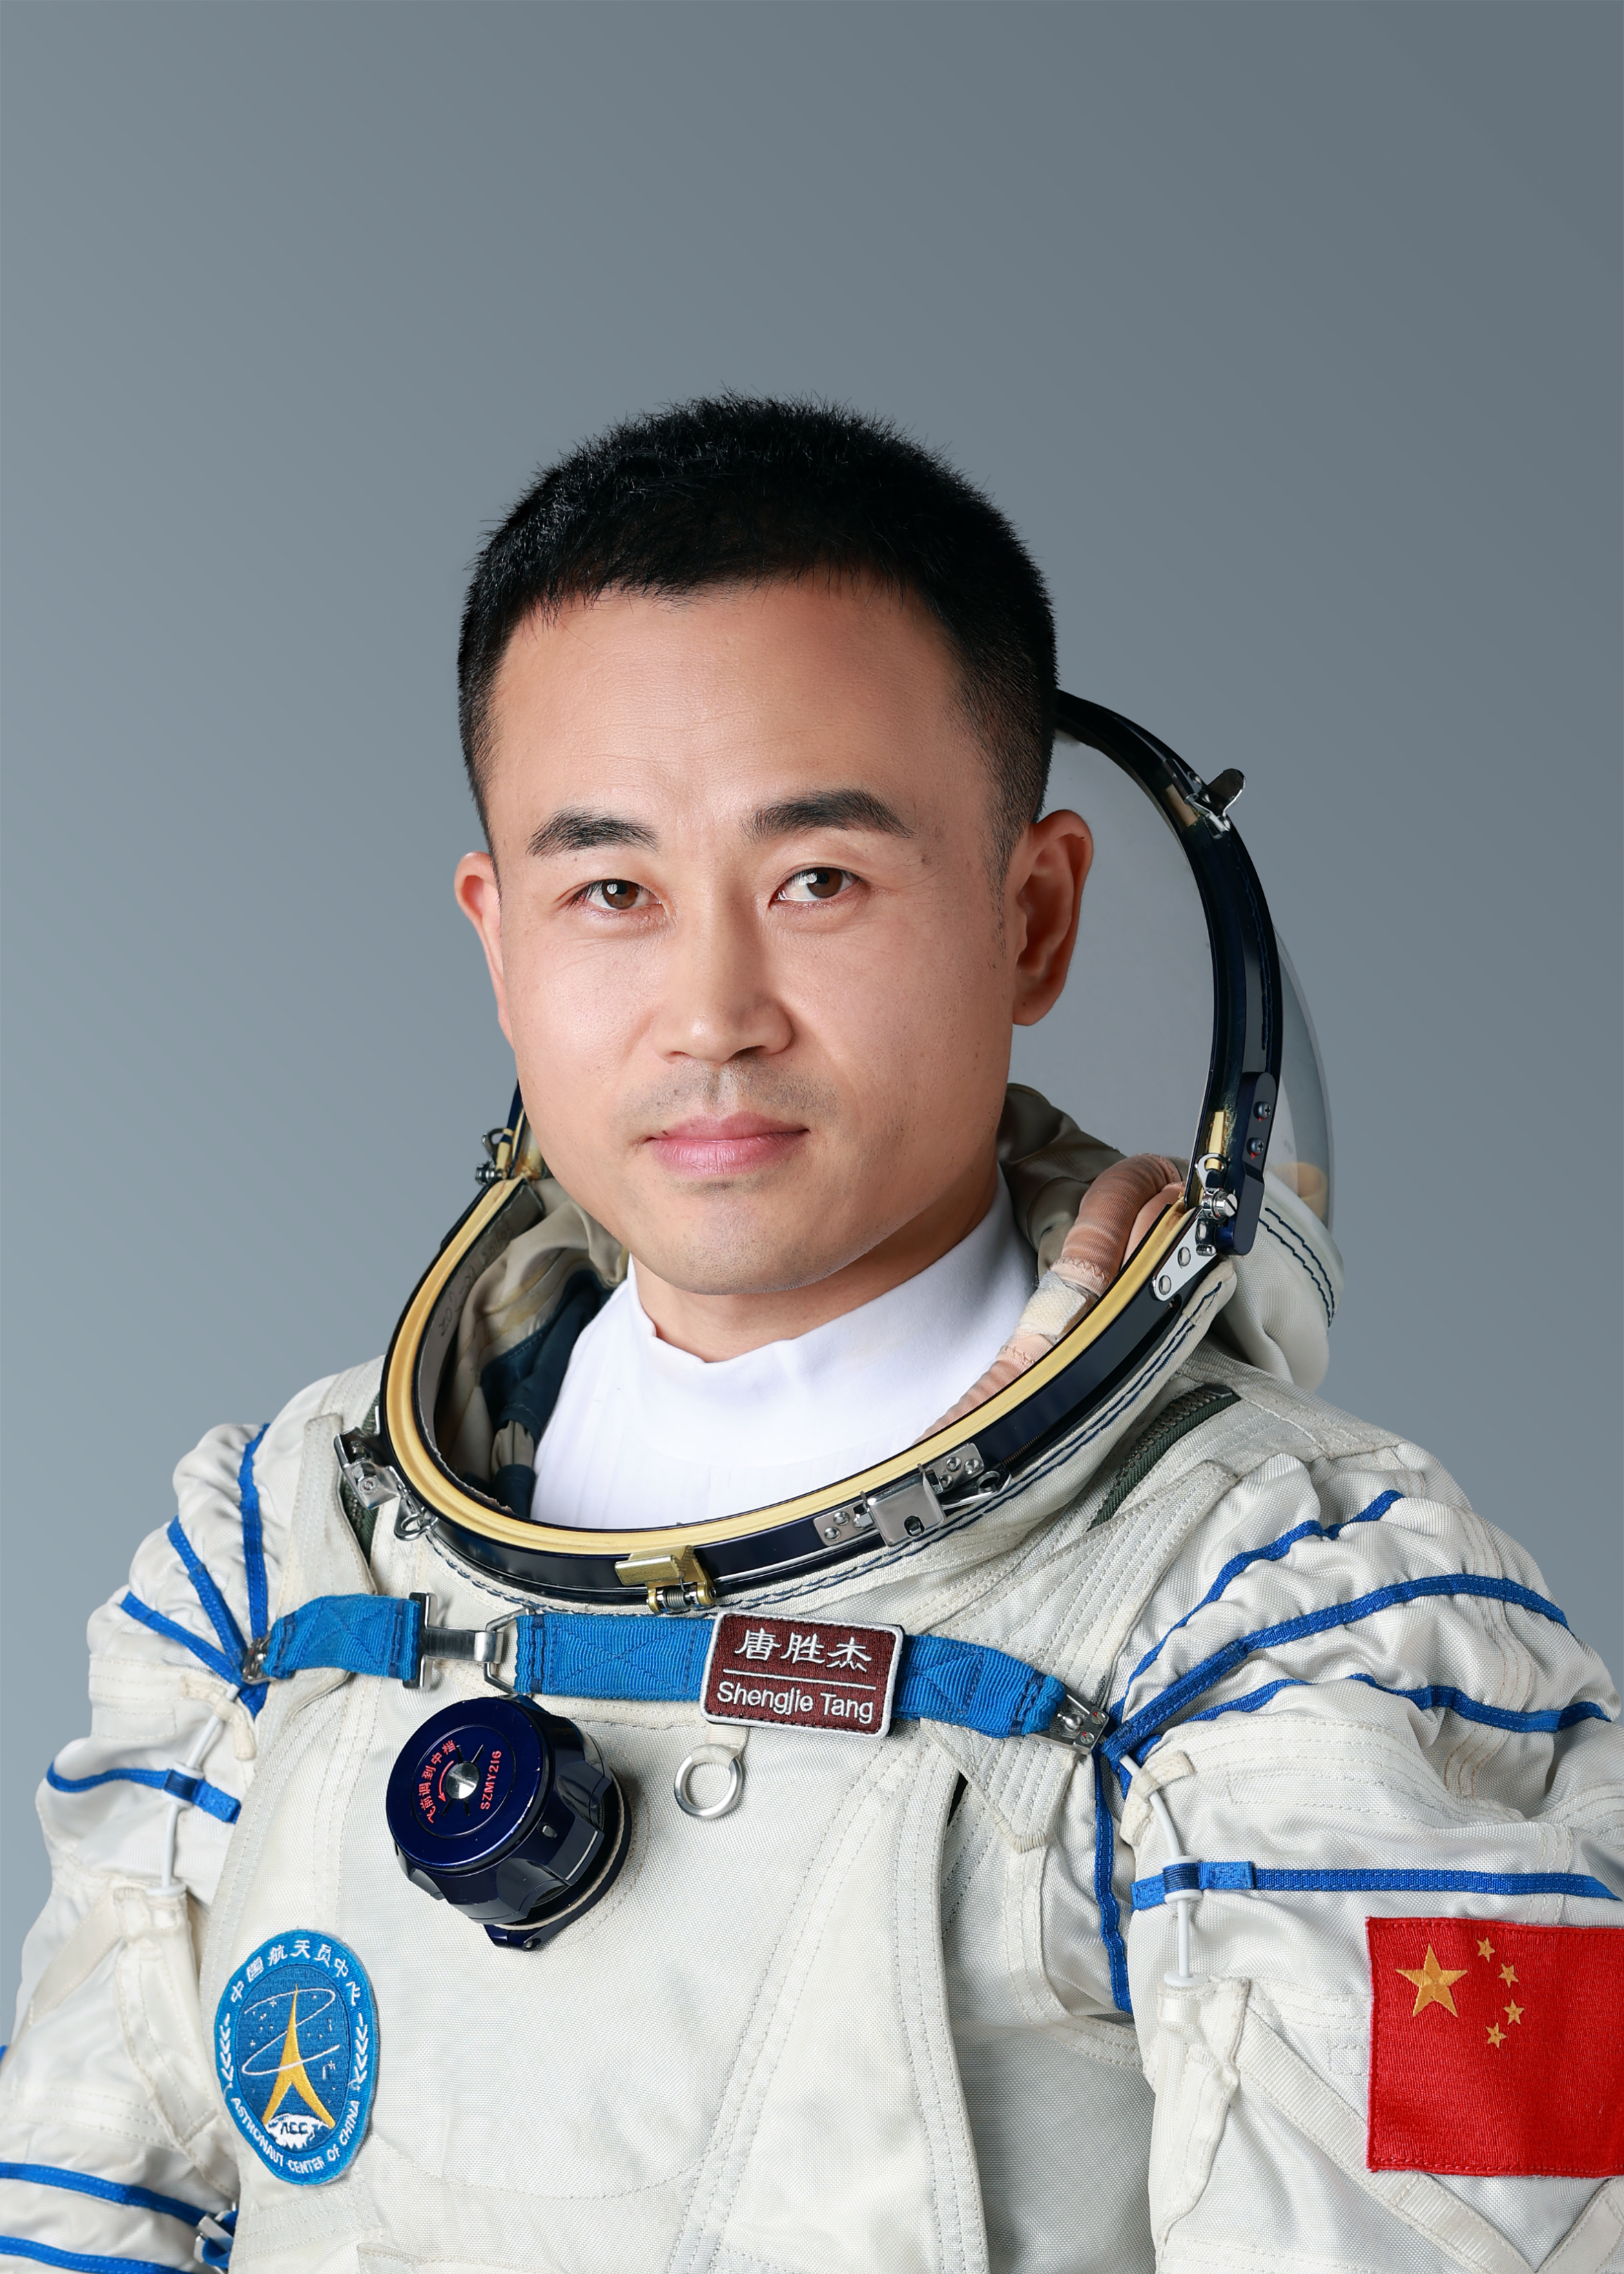  Astronaut Tang Shengjie. Courtesy of China Manned Space Engineering Office